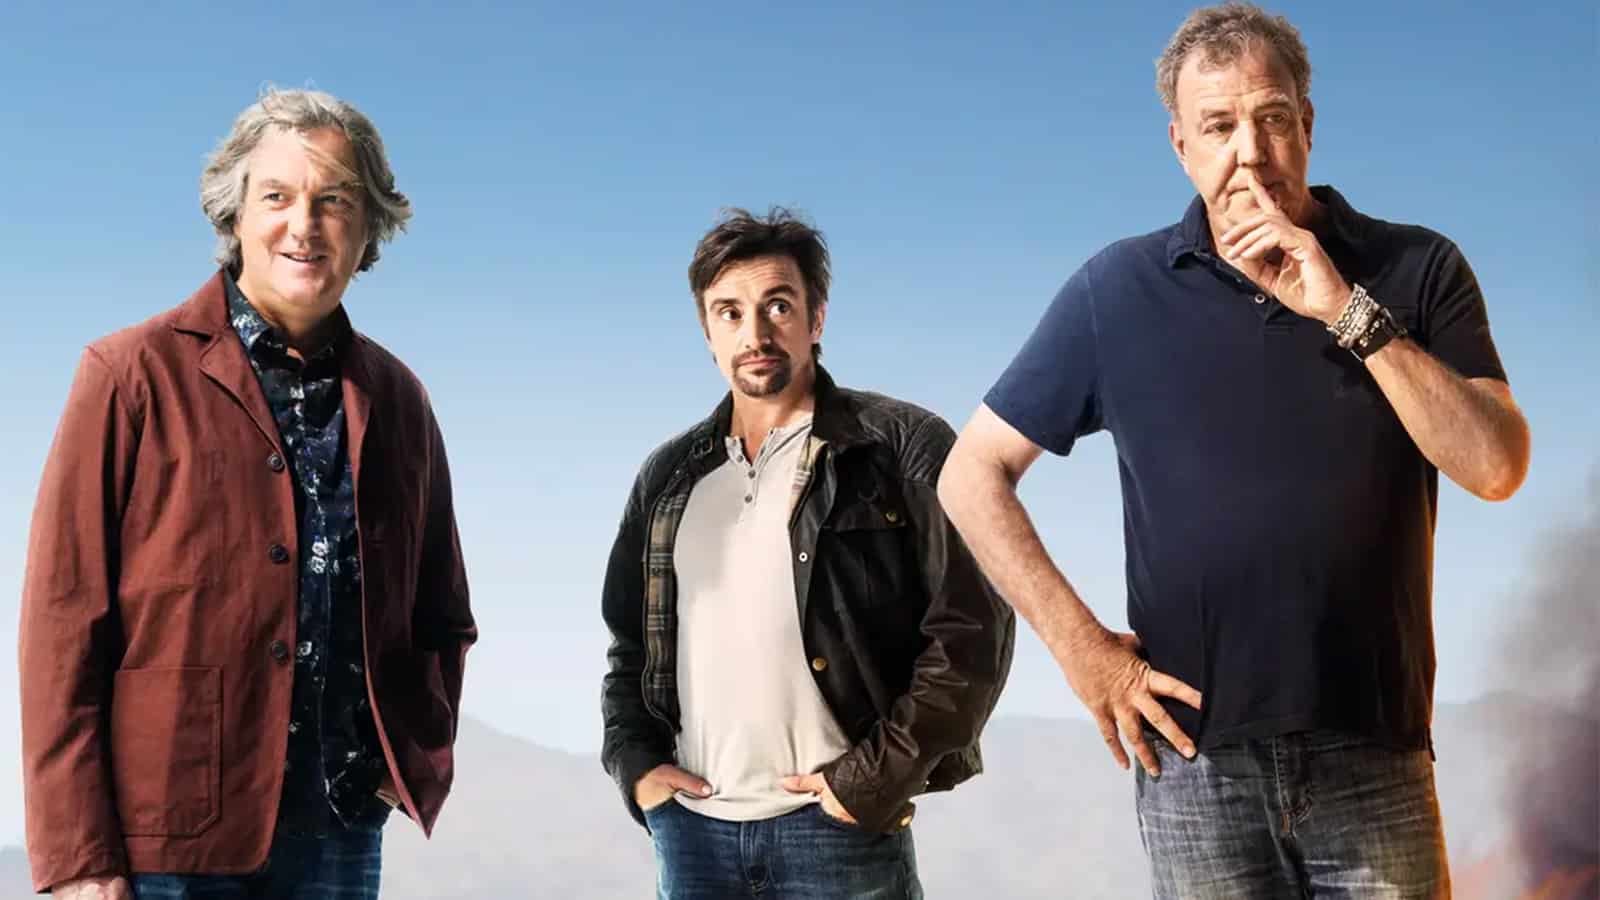 The Grand Tour: What To Expect From The Next Episode